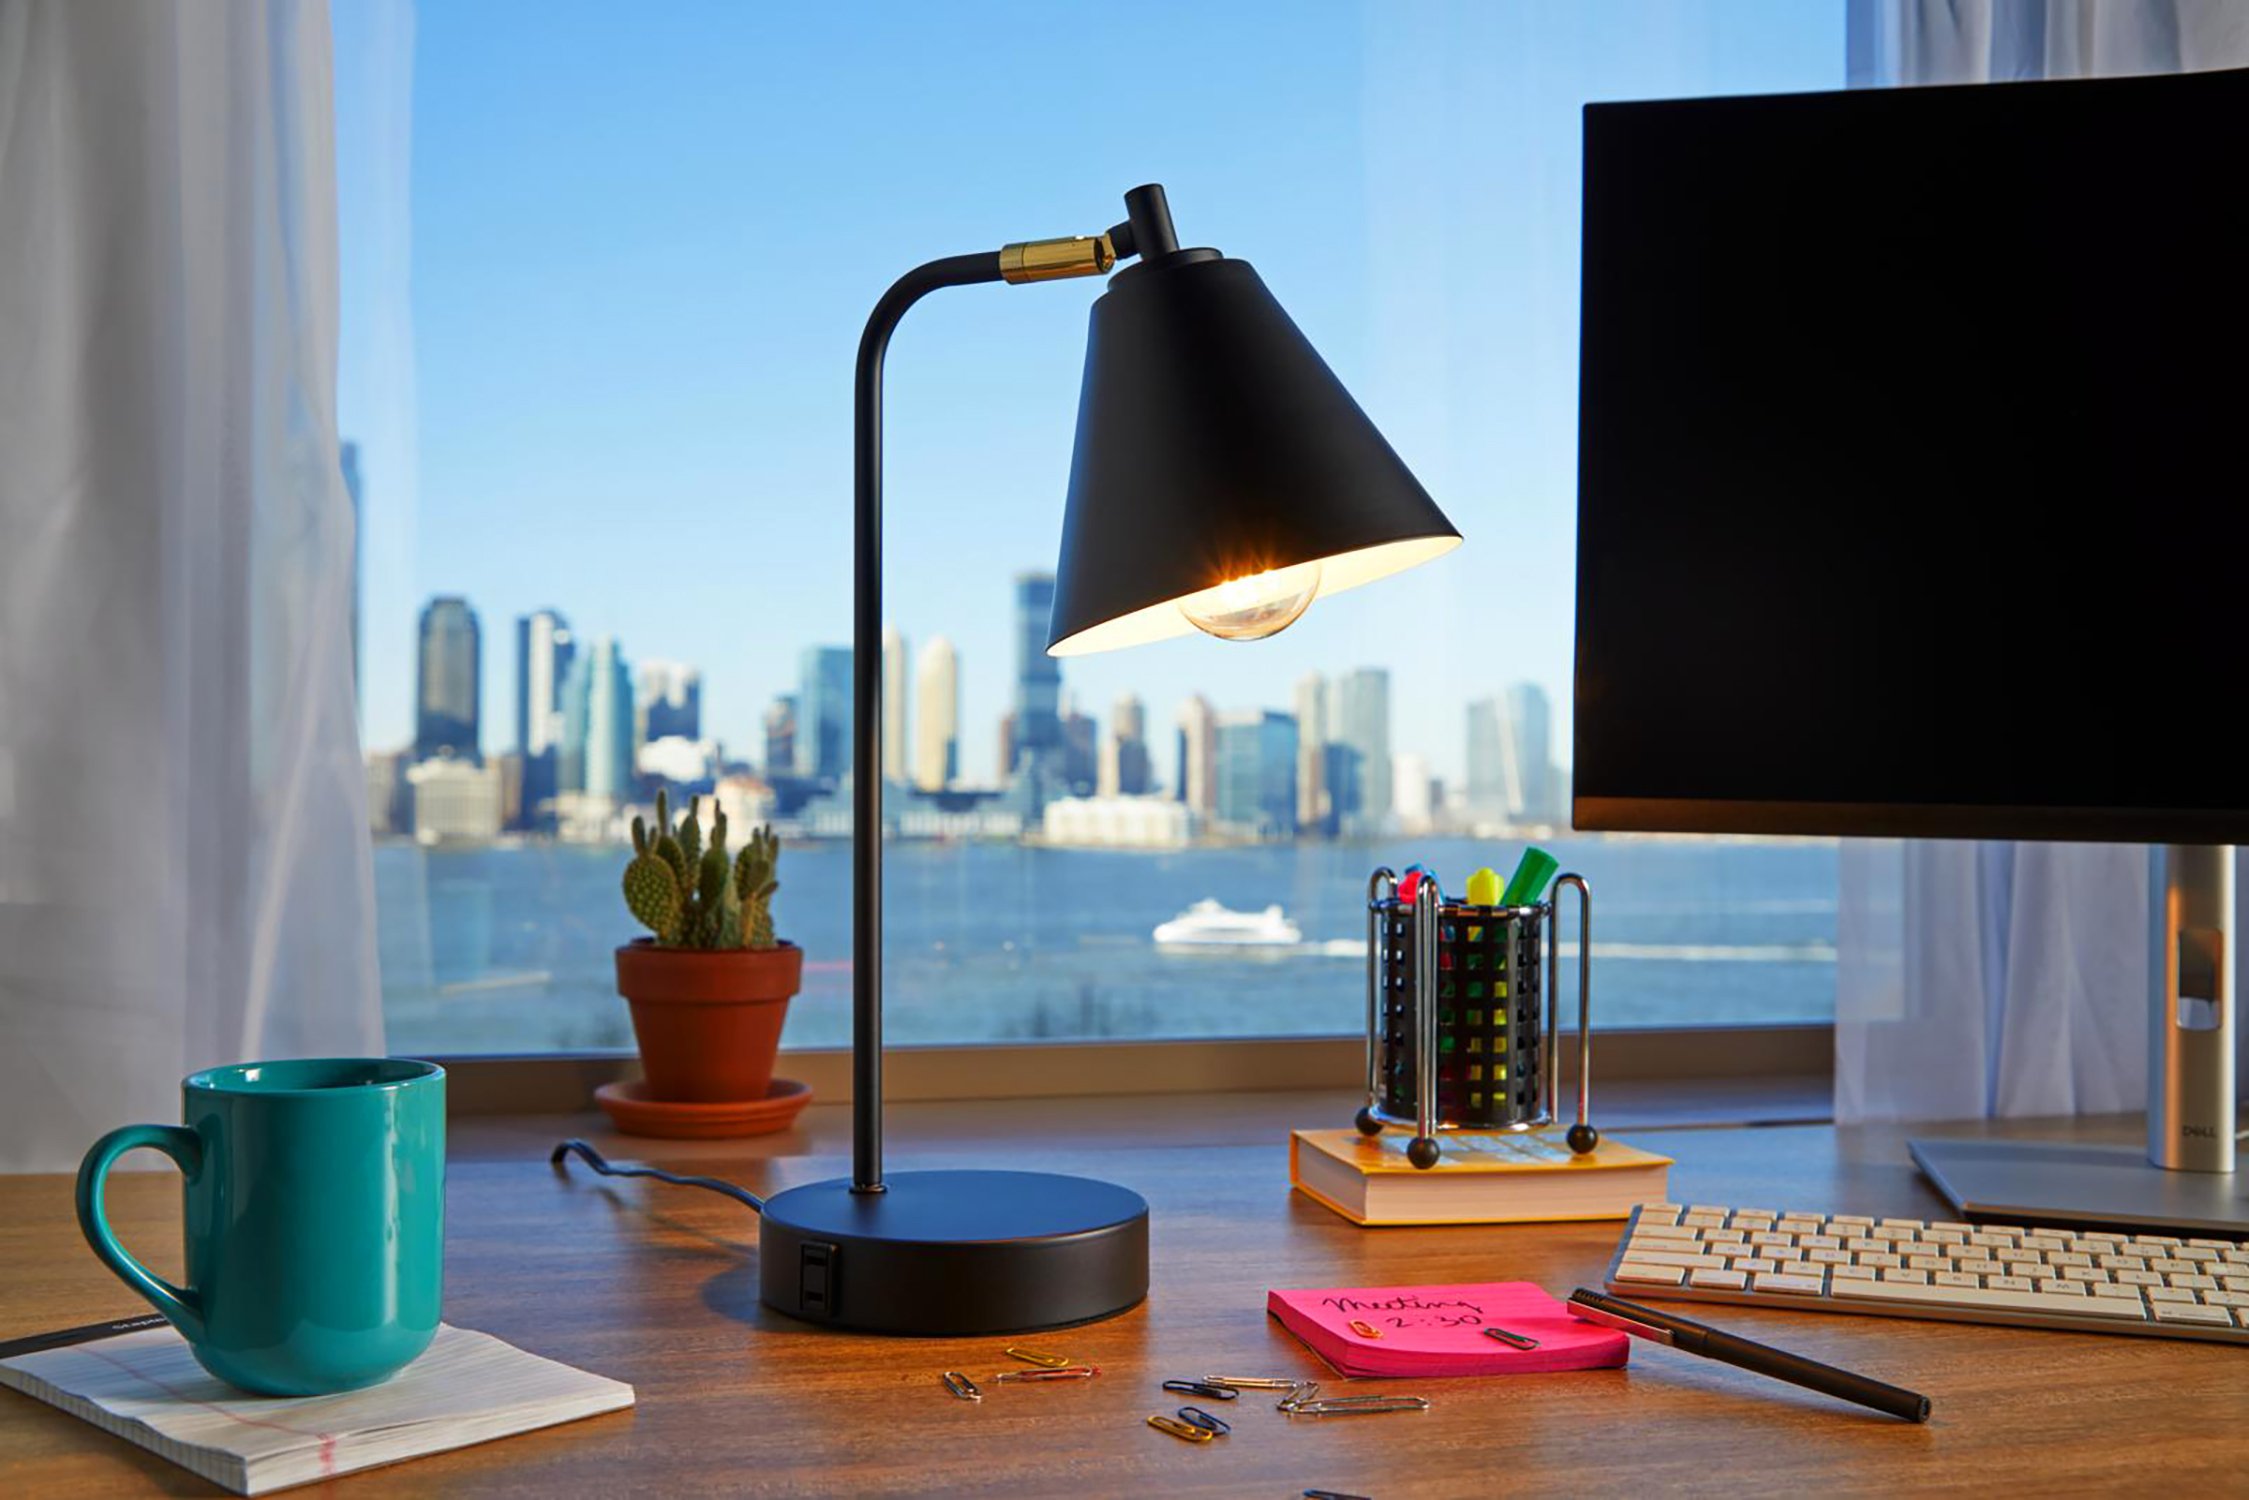 bhg-product-brightever-industrial-dimmable-desk-lamp-2-usb-charging-ports-tstaples-2189_preview.jpg